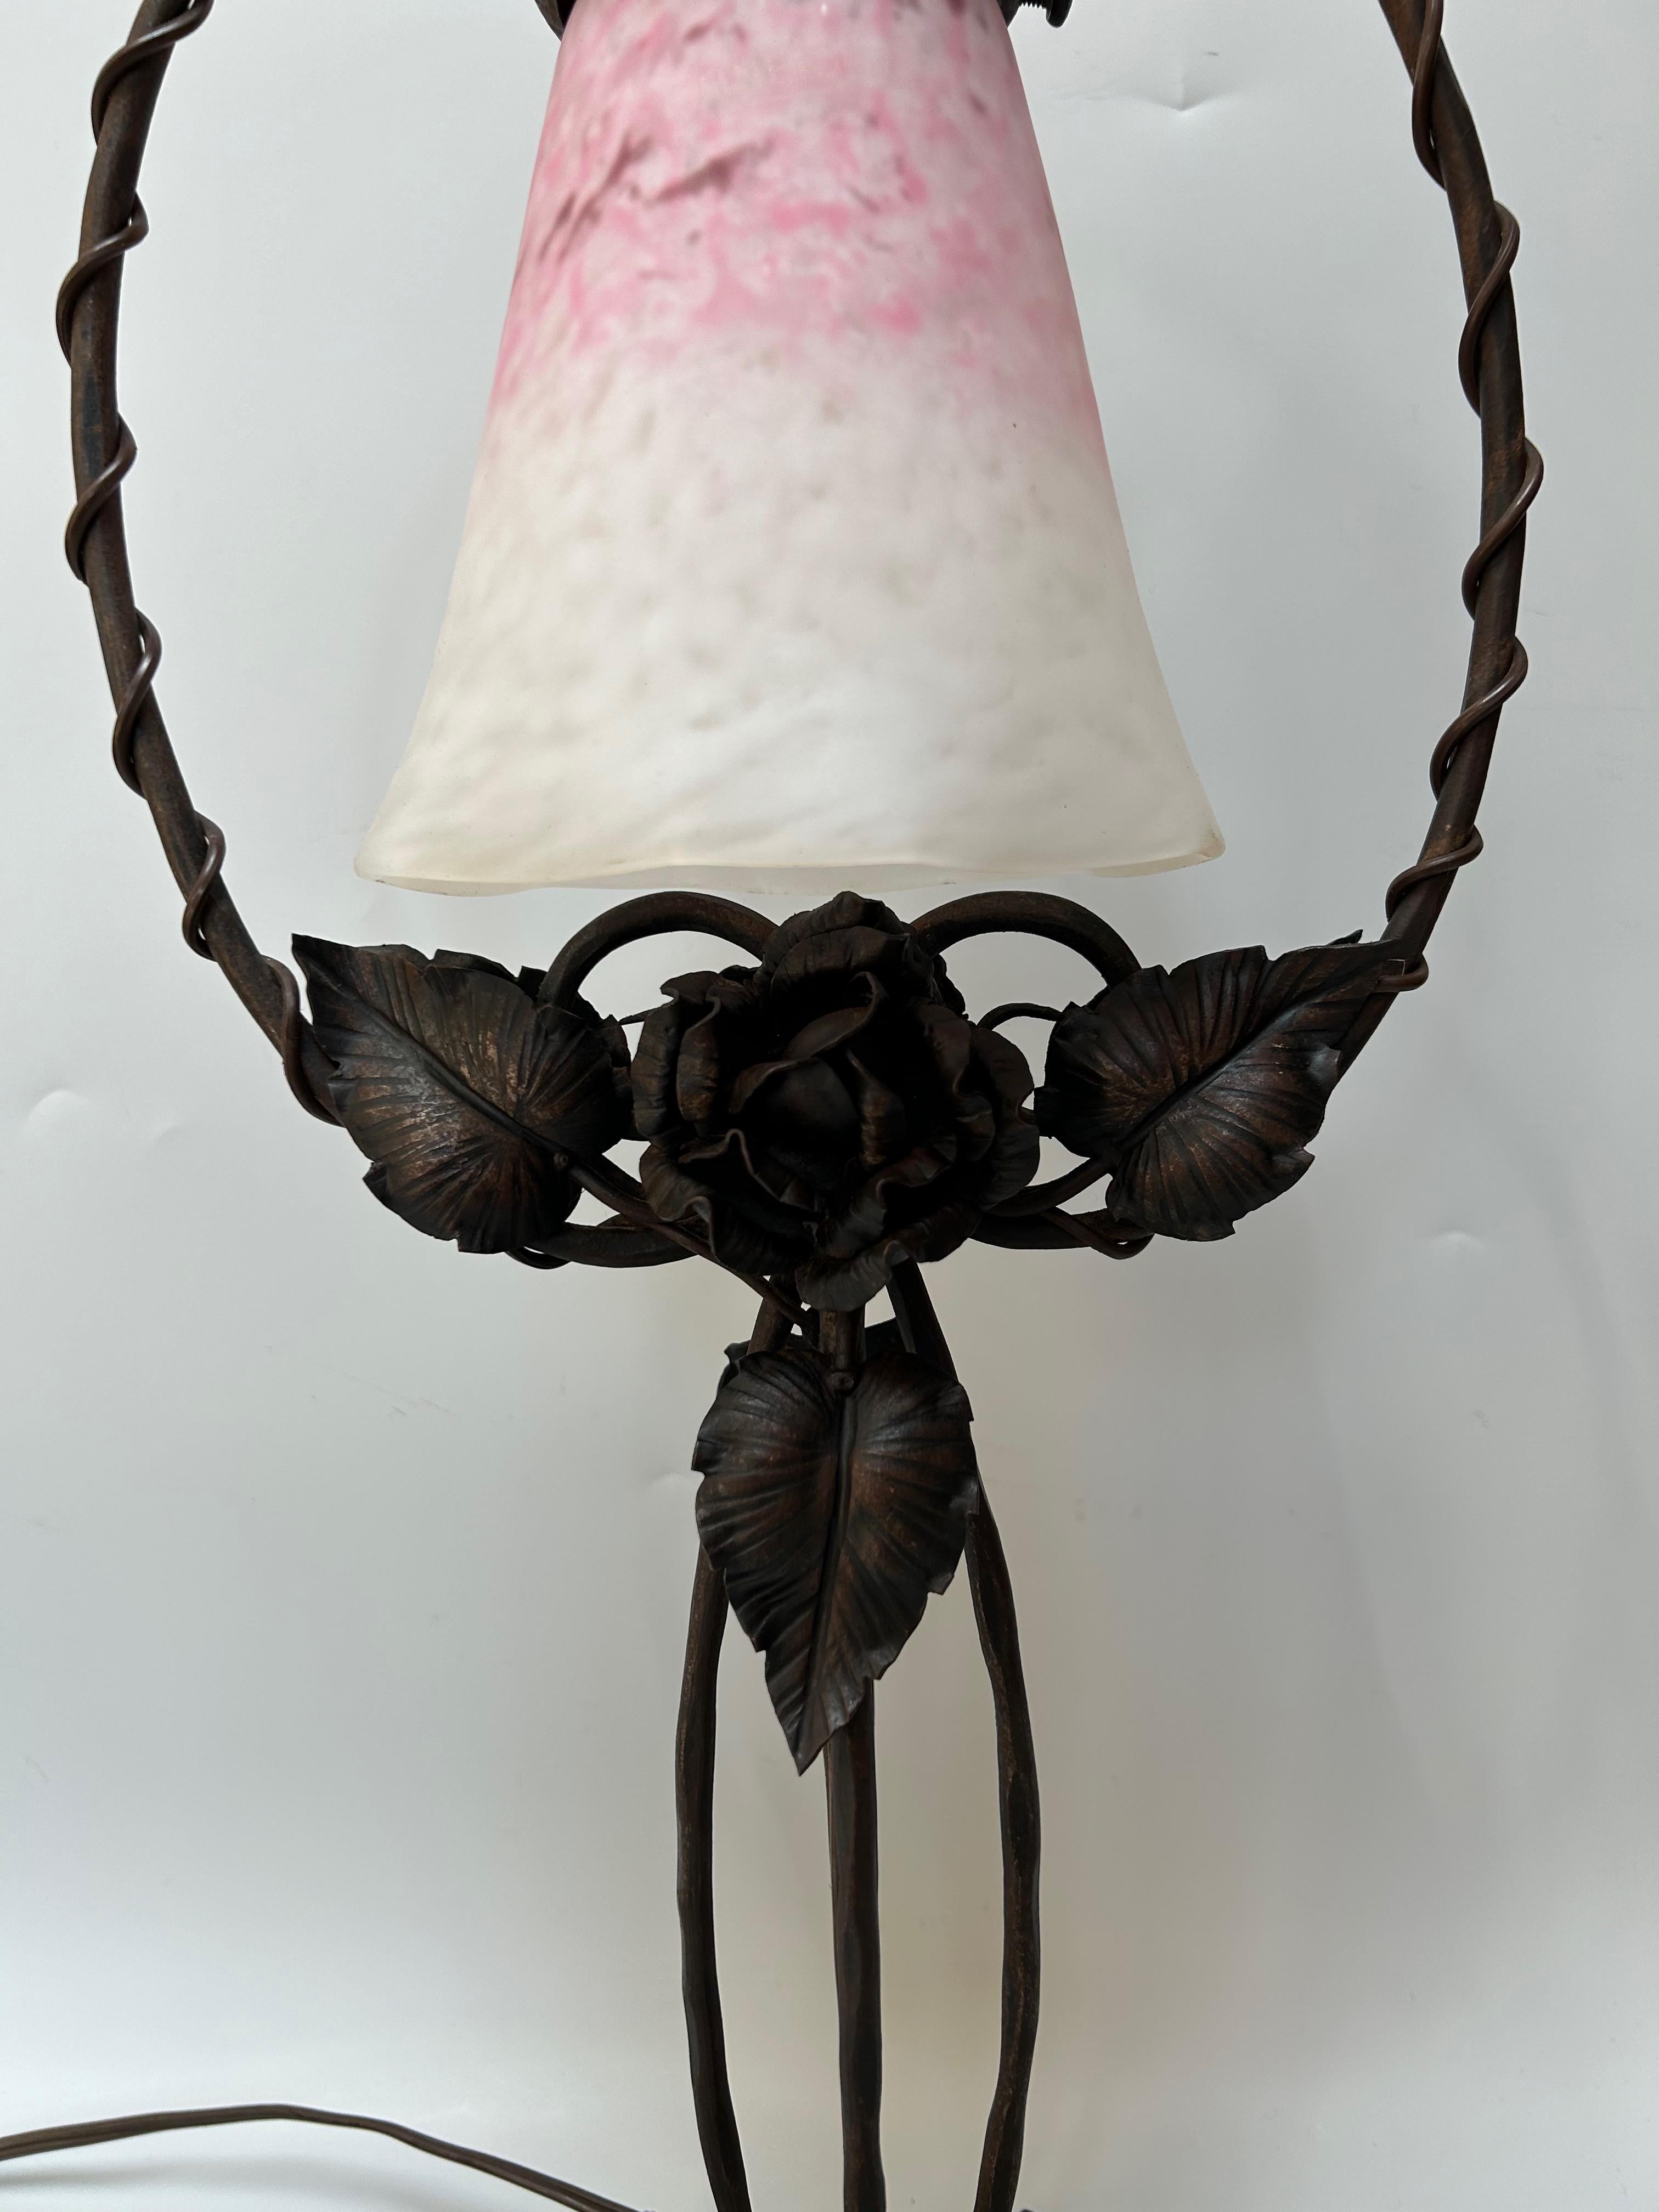 Art deco lamp circa 1925 wrought iron base decorated with roses. 
Tulip in white and pink speckled glass signed Schneider. 
In perfect condition and electrified.

Width: base 15 x 15 cm
Height: 48 cm

Charles SCHNEIDER, born February 23, 1881 and